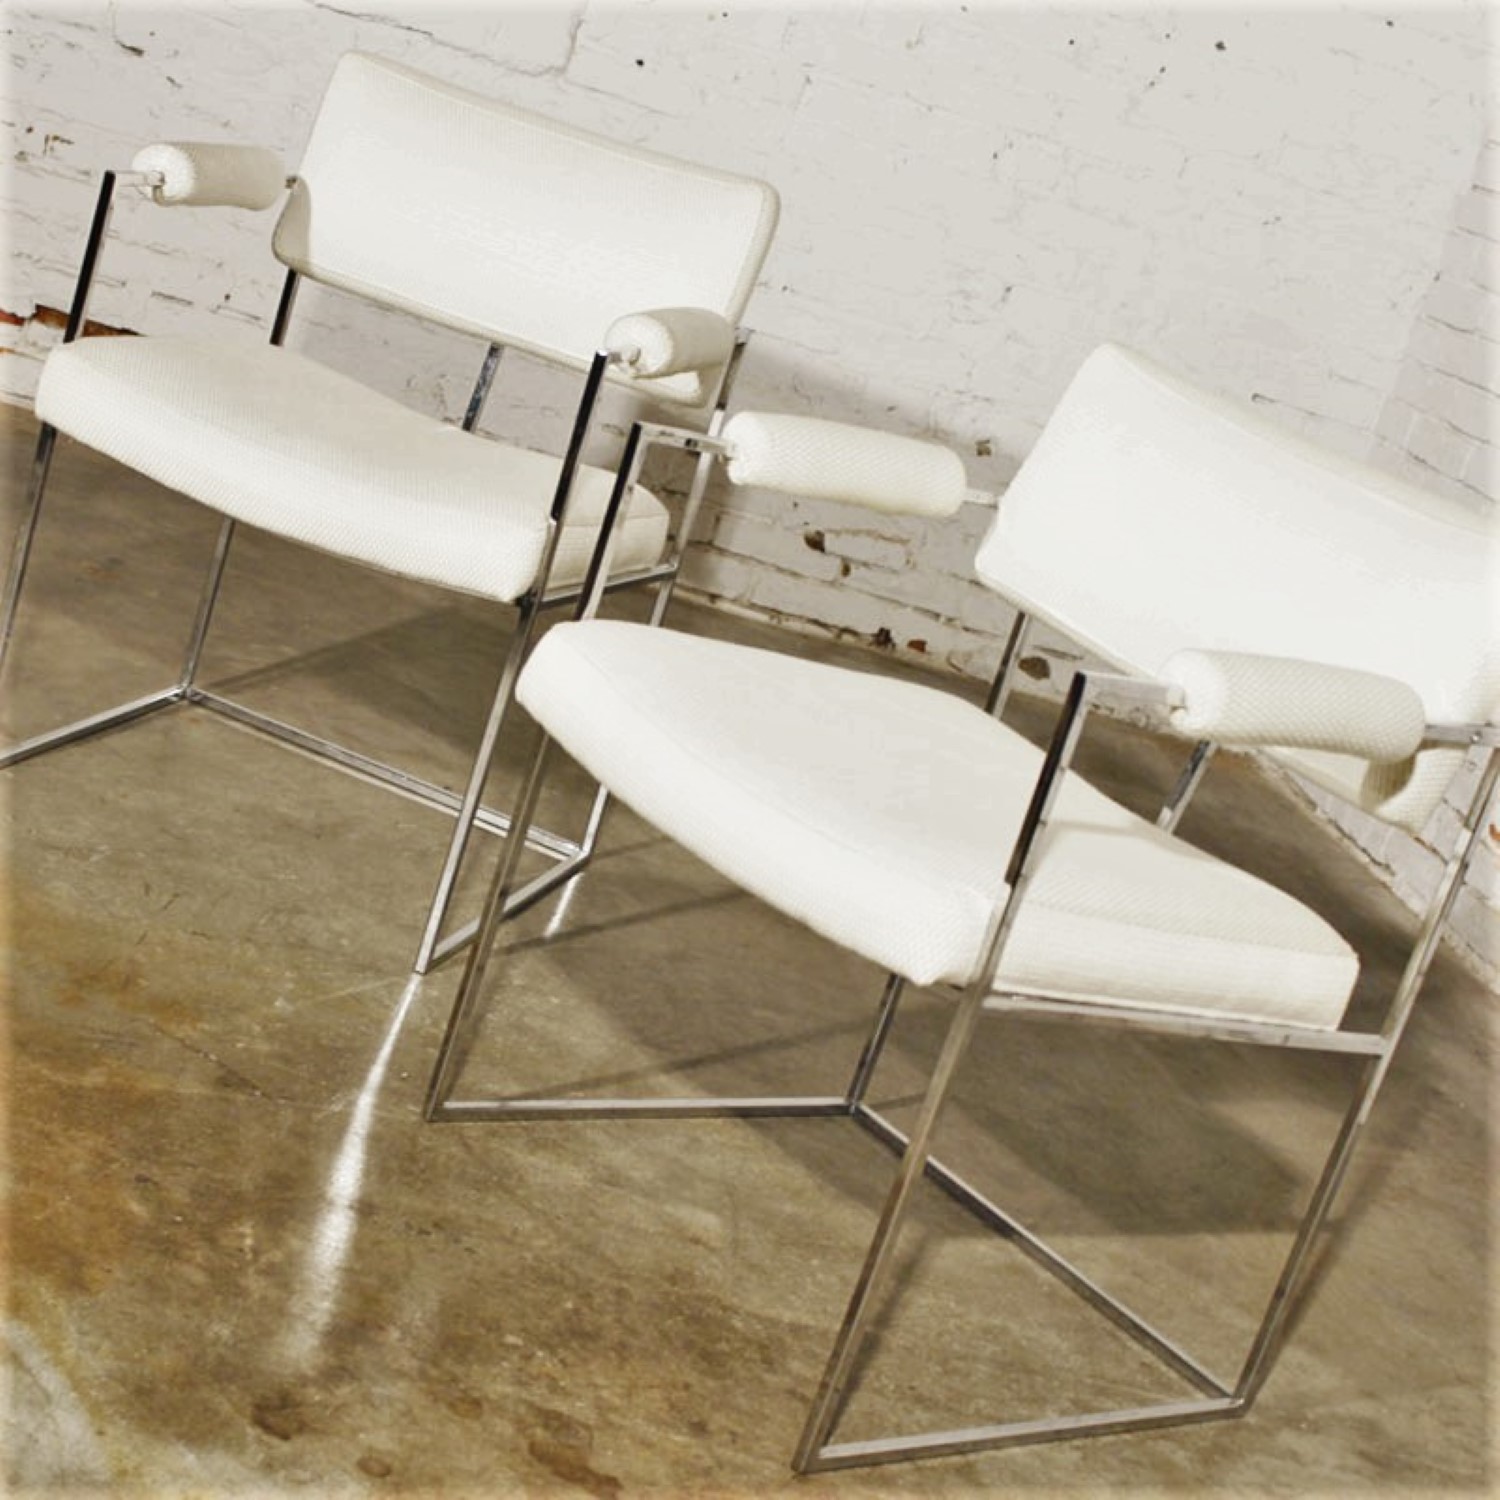 Pair Vintage Milo Baughman 1188 Dining Chairs in White